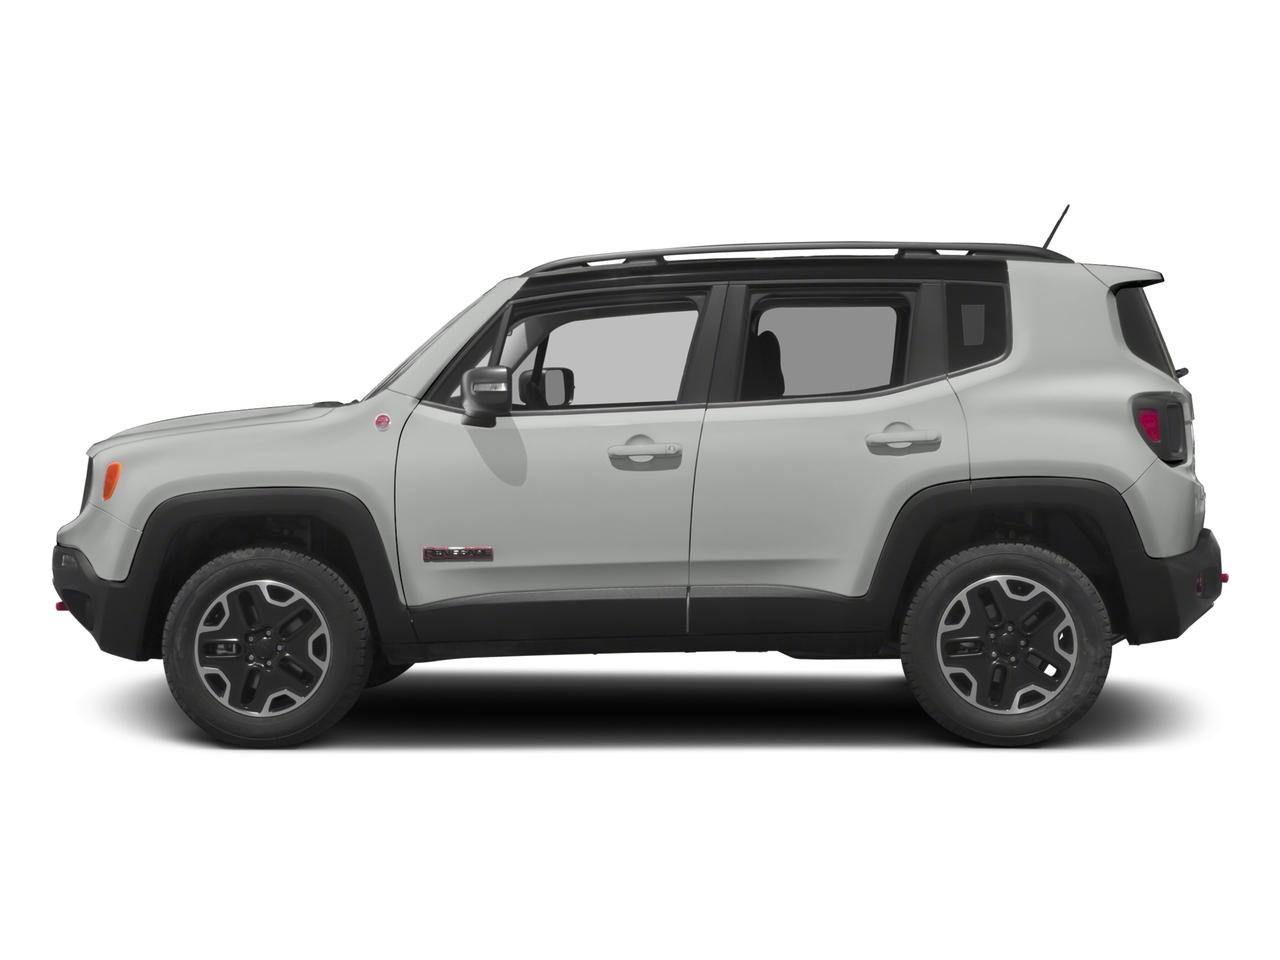 2016 Jeep Renegade Vehicle Photo in Ft. Myers, FL 33907